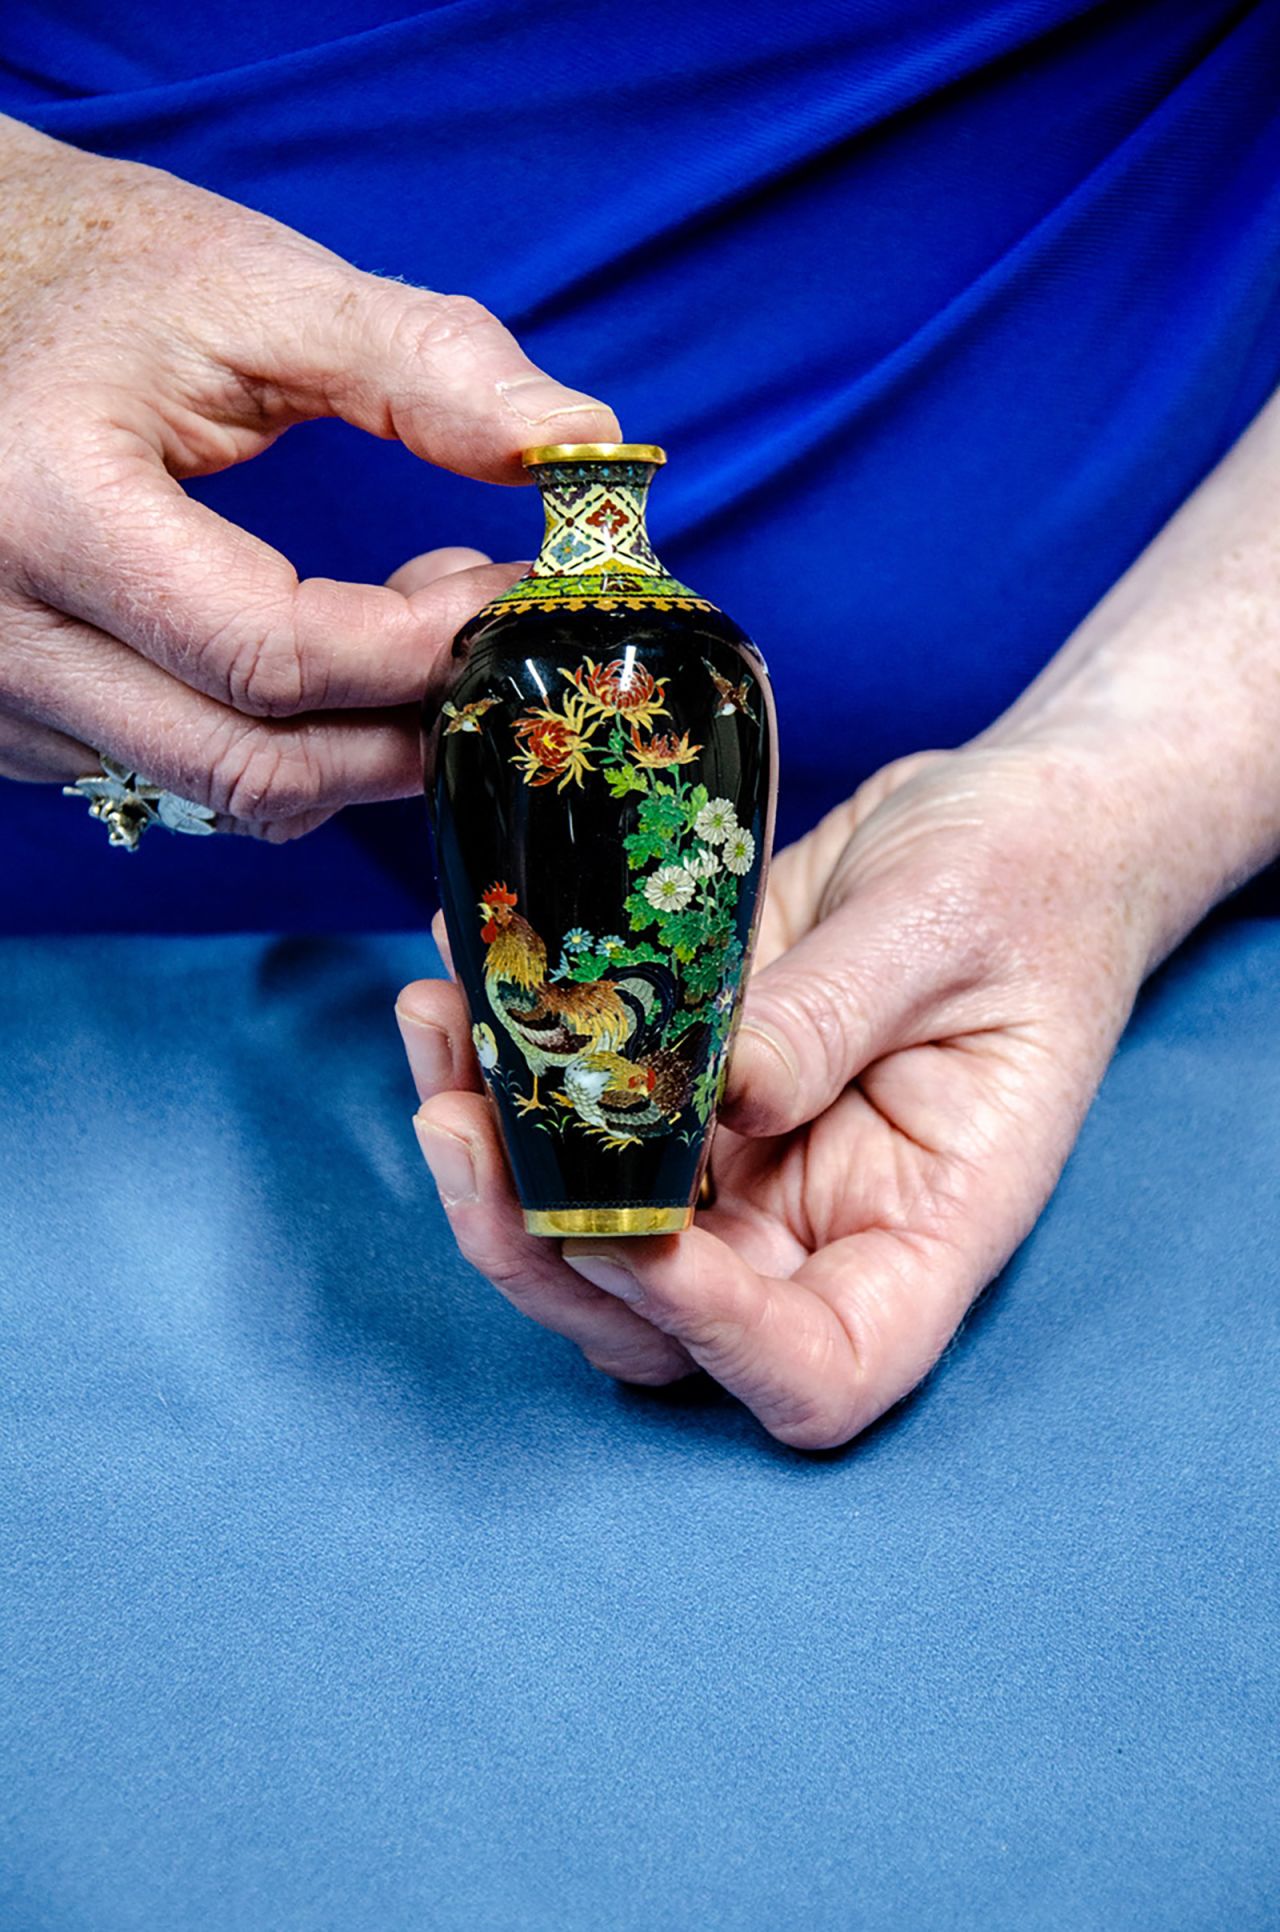 Tiny vase bought at thrift shop could sell for $11,800